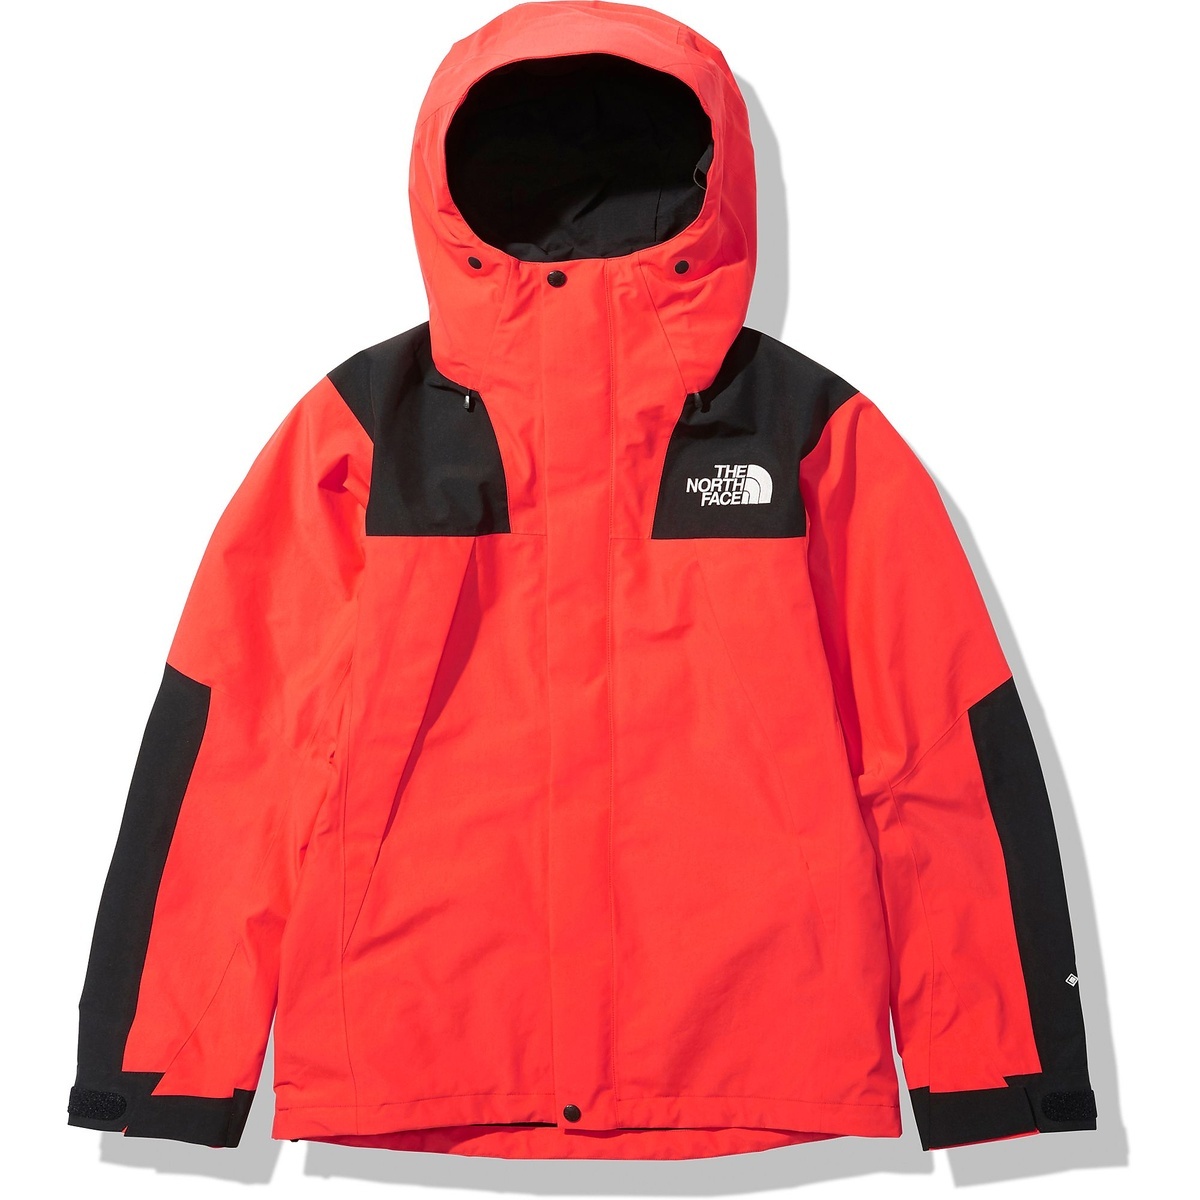 THE NORTH FACE THE NORTH FACE マウンテン ジャケット メンズ NP61800